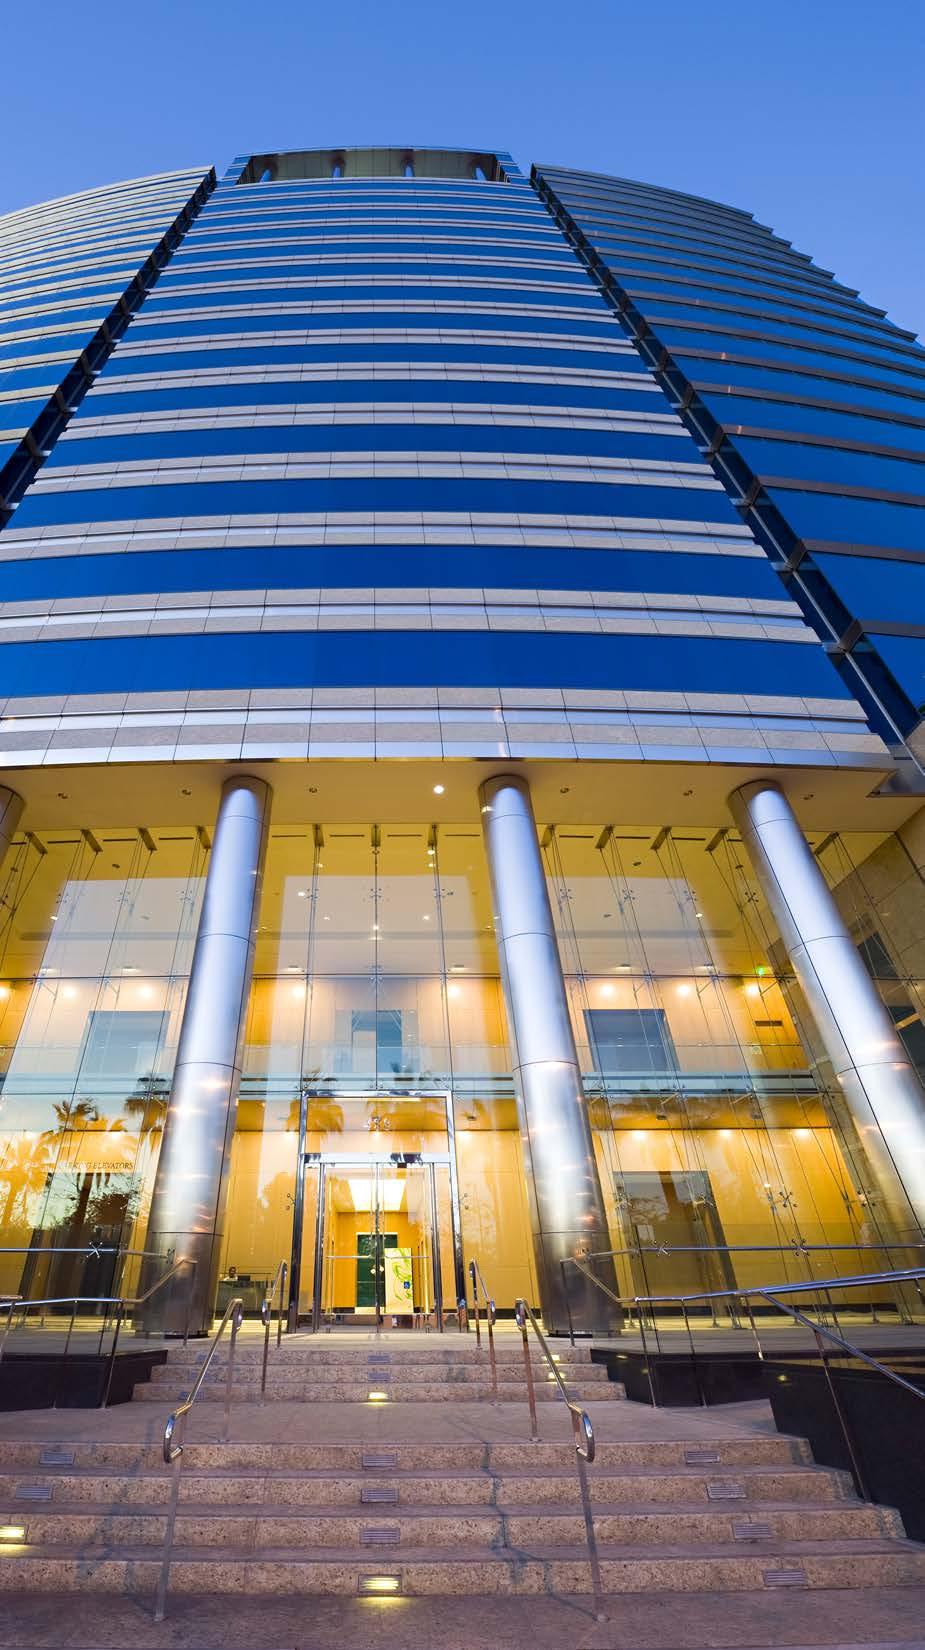 88 A -story, 378,96 square foot, Class A trophy office tower, is located in Downtown San Jose, the financial and technology capital of Silicon Valley.